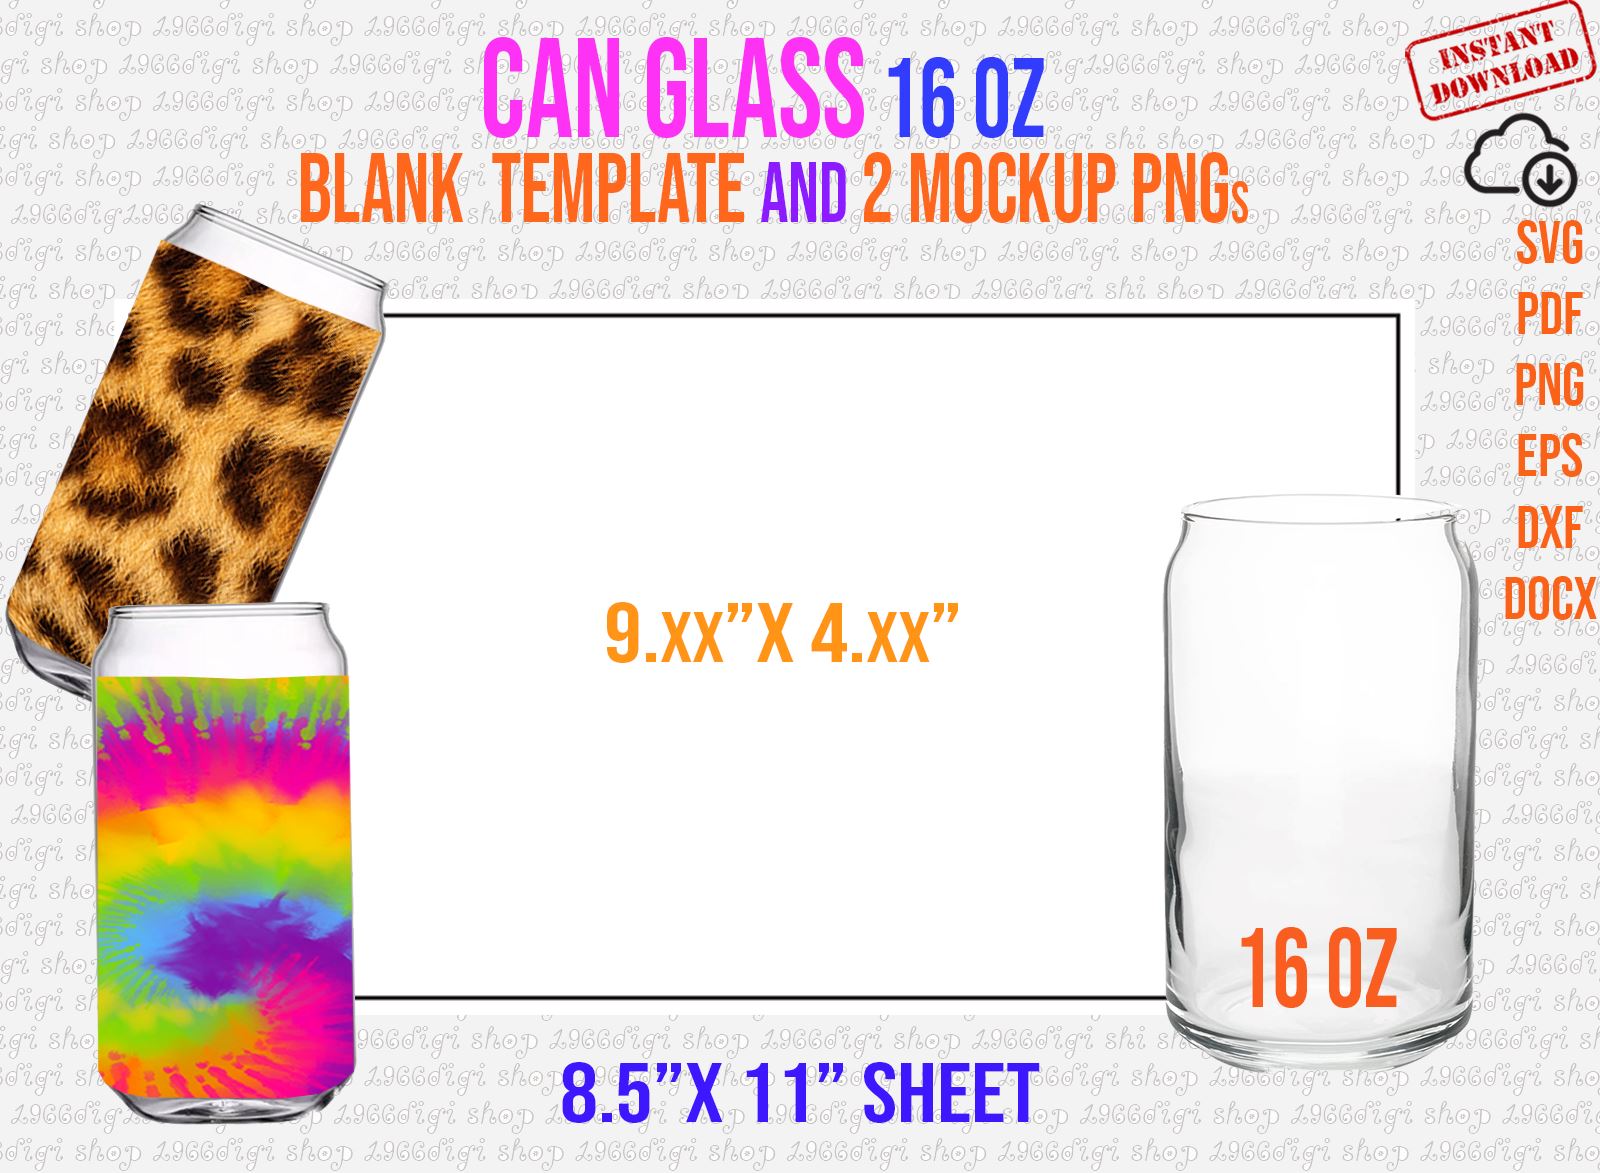 Beer Can Glass SVG Wrap Summer Libby Glass Can Svg Libbey 